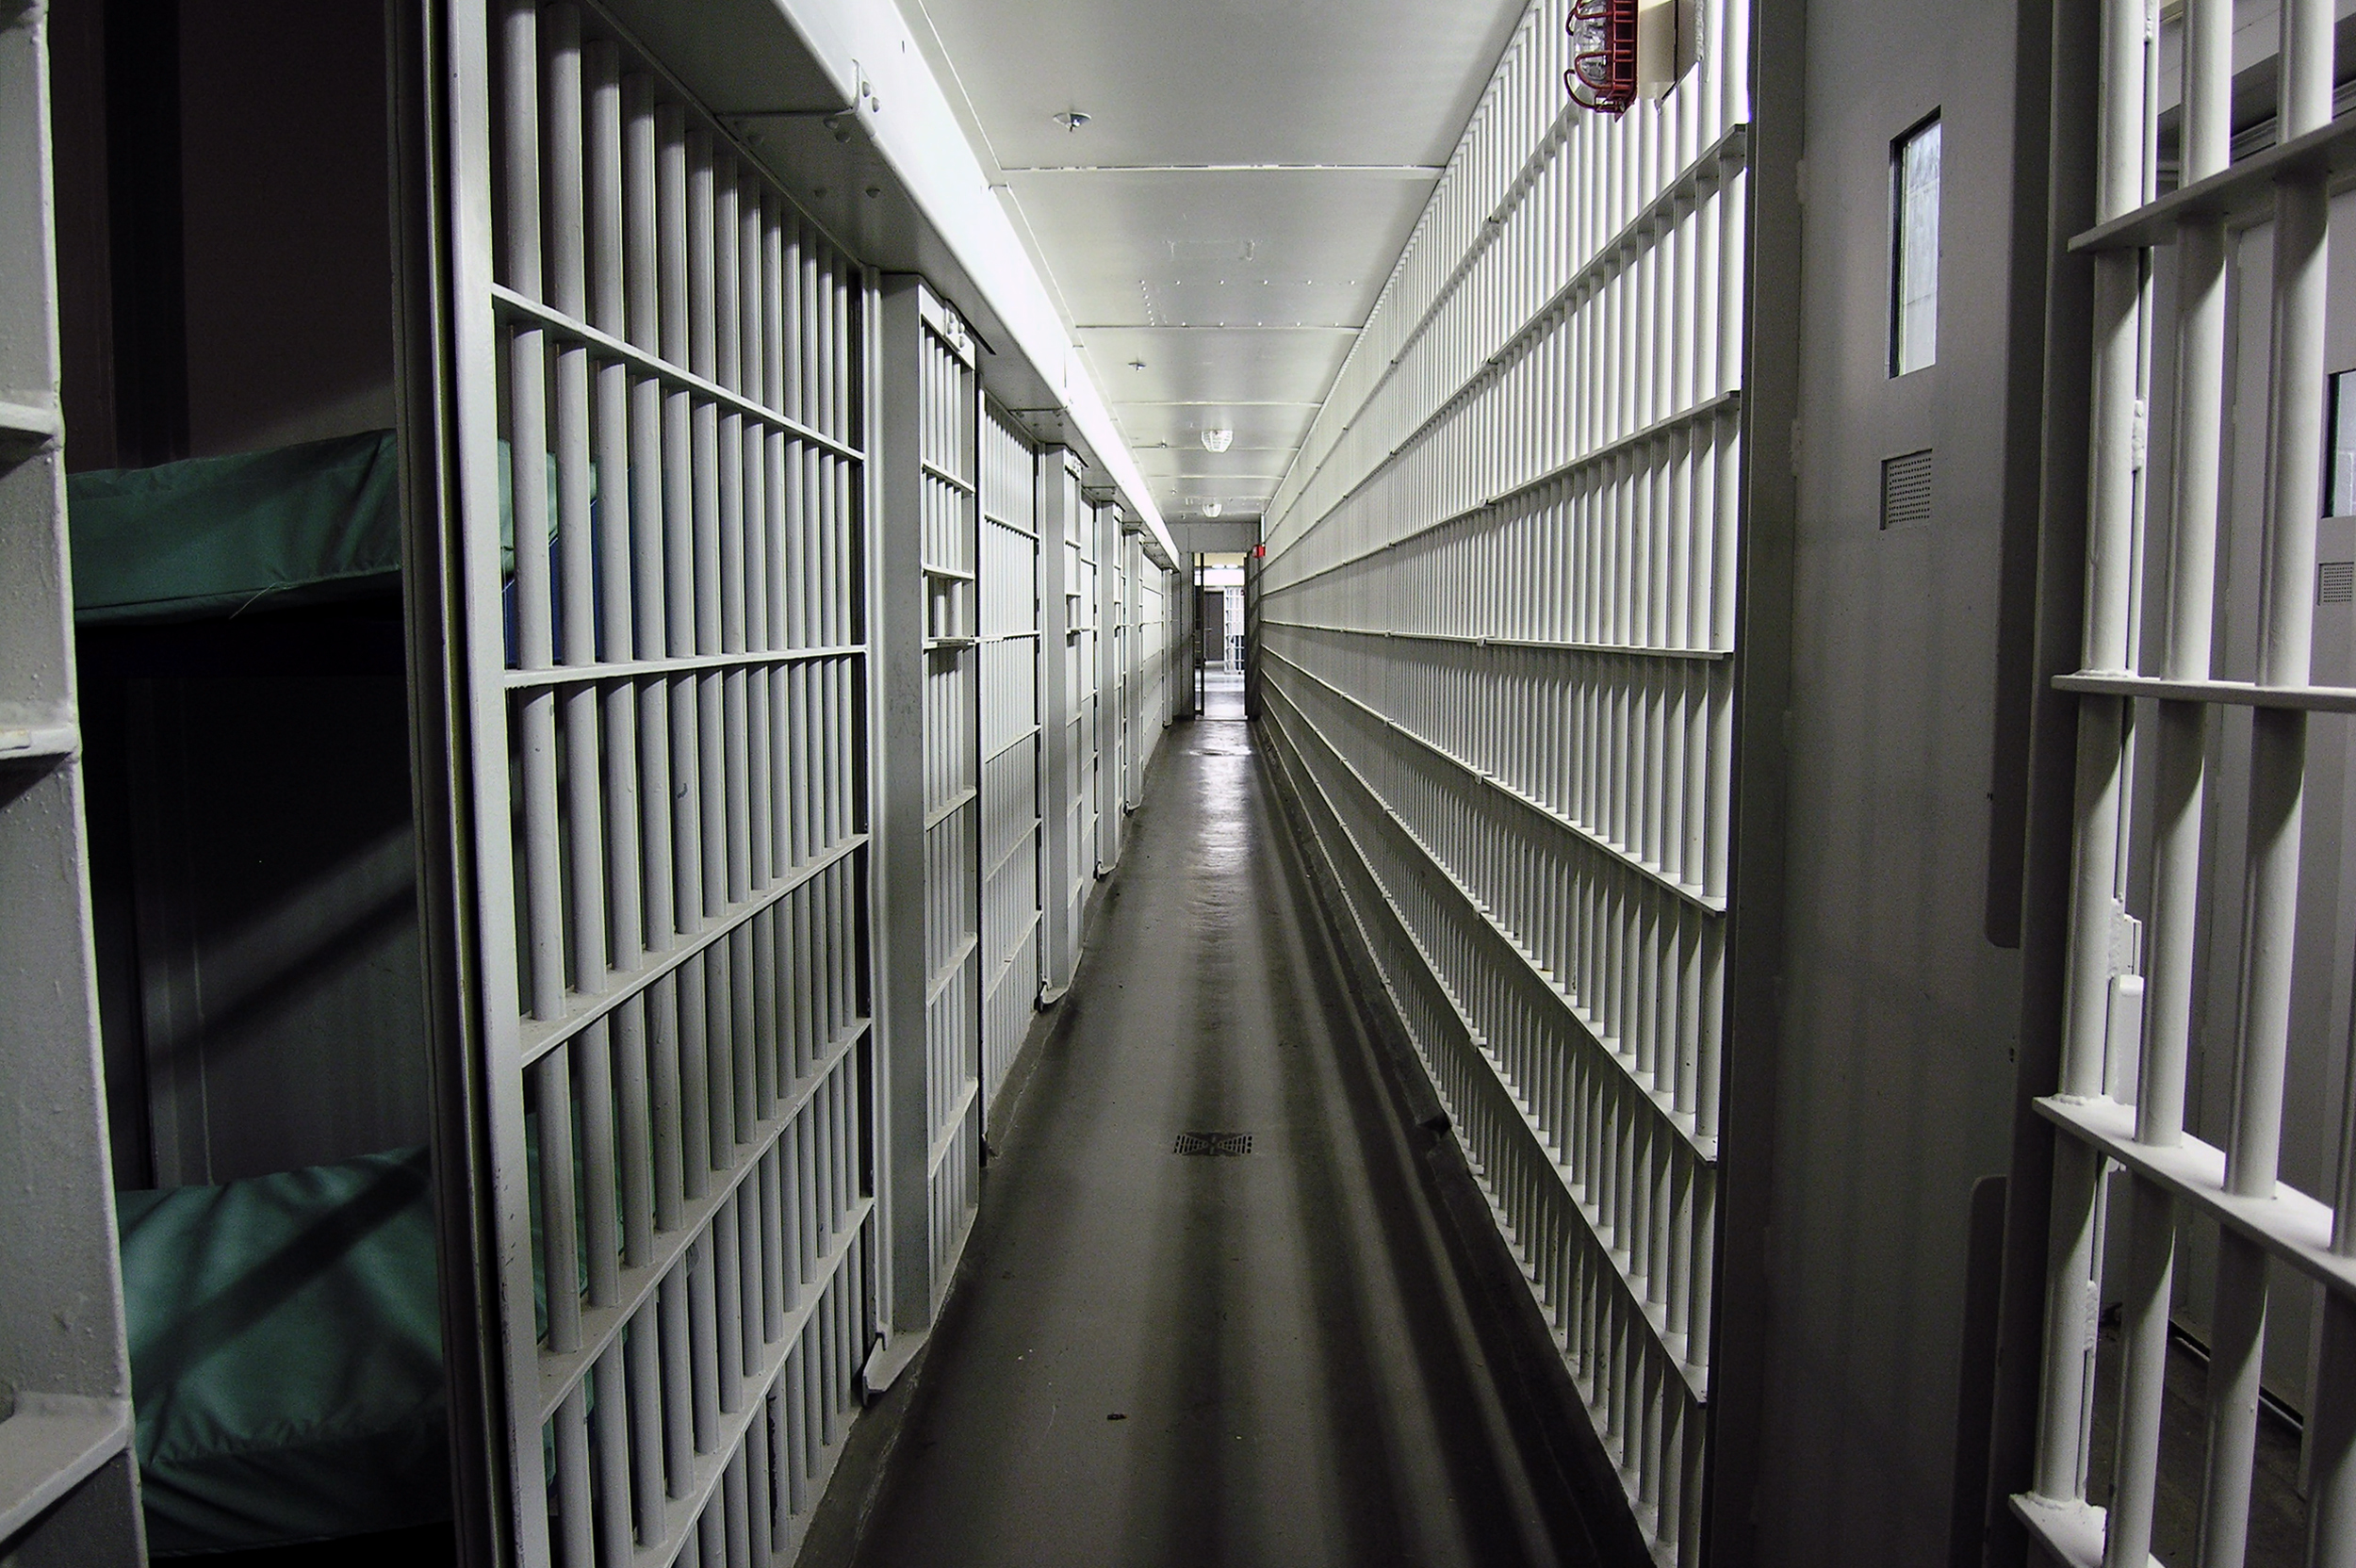 Lawsuit Filed to Protect Young People in Washington from Being Transferred to Adult Prison